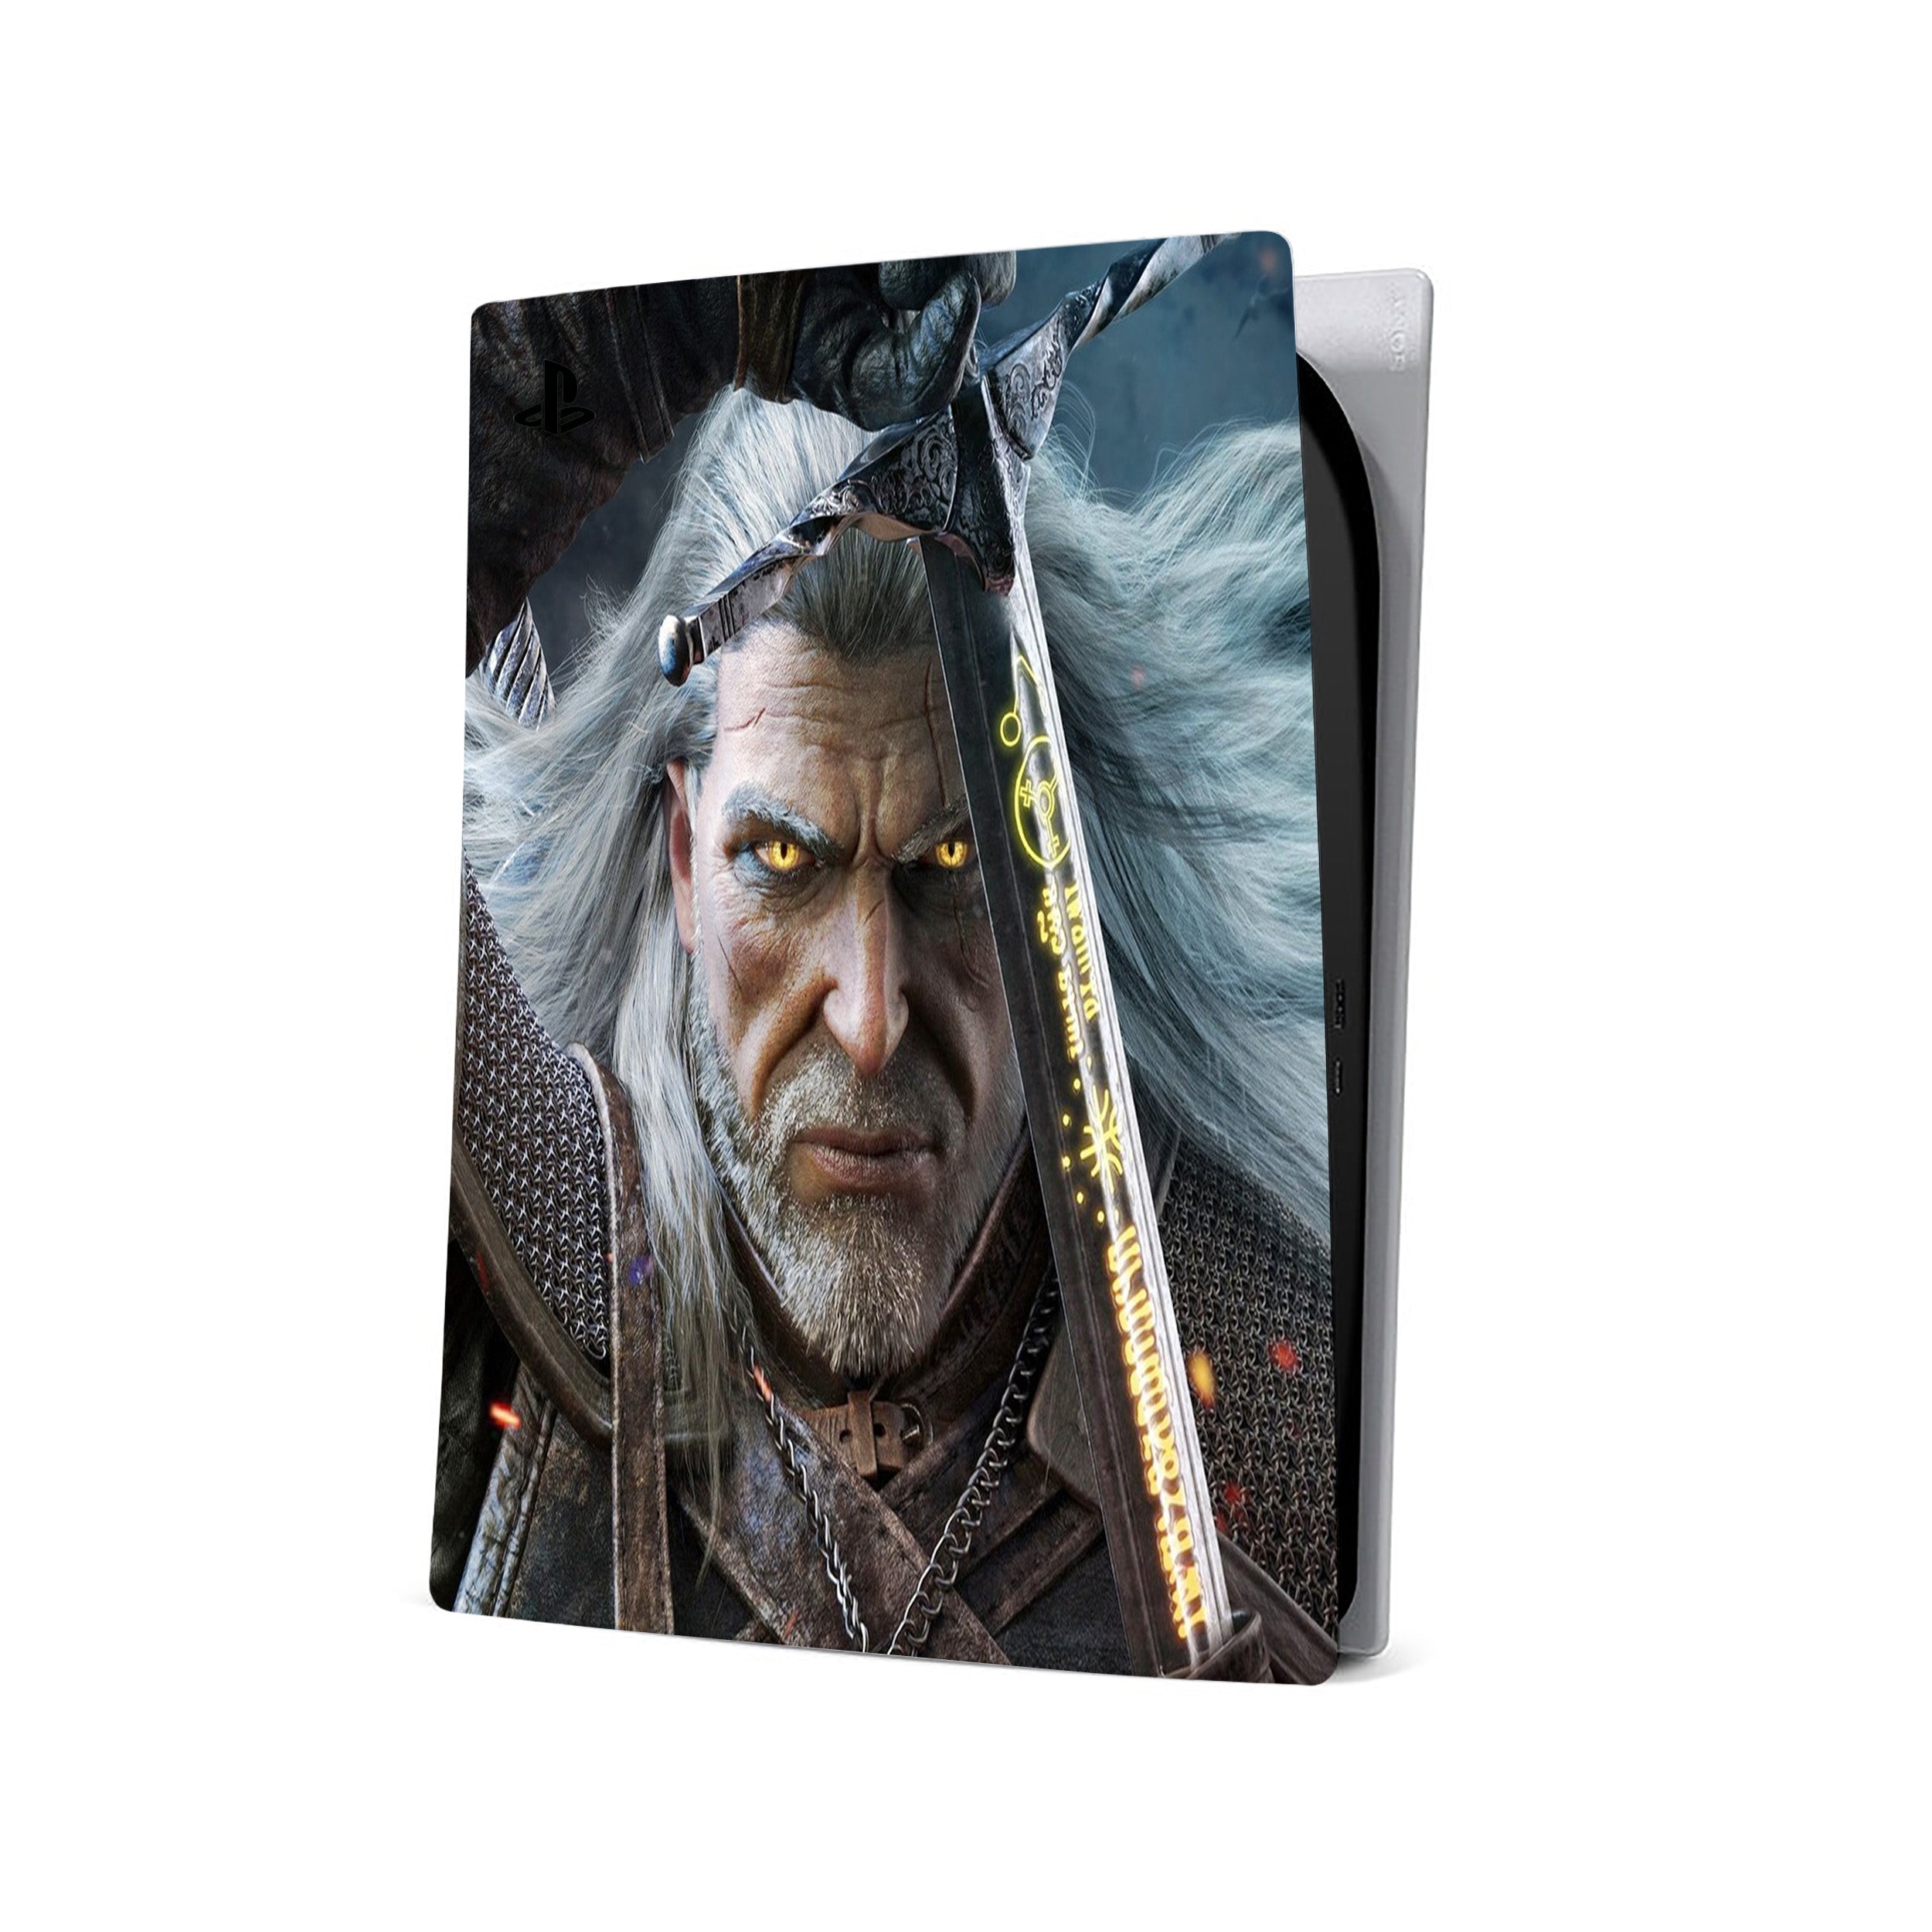 A video game skin featuring a The Witcher 3 design for the PS5.